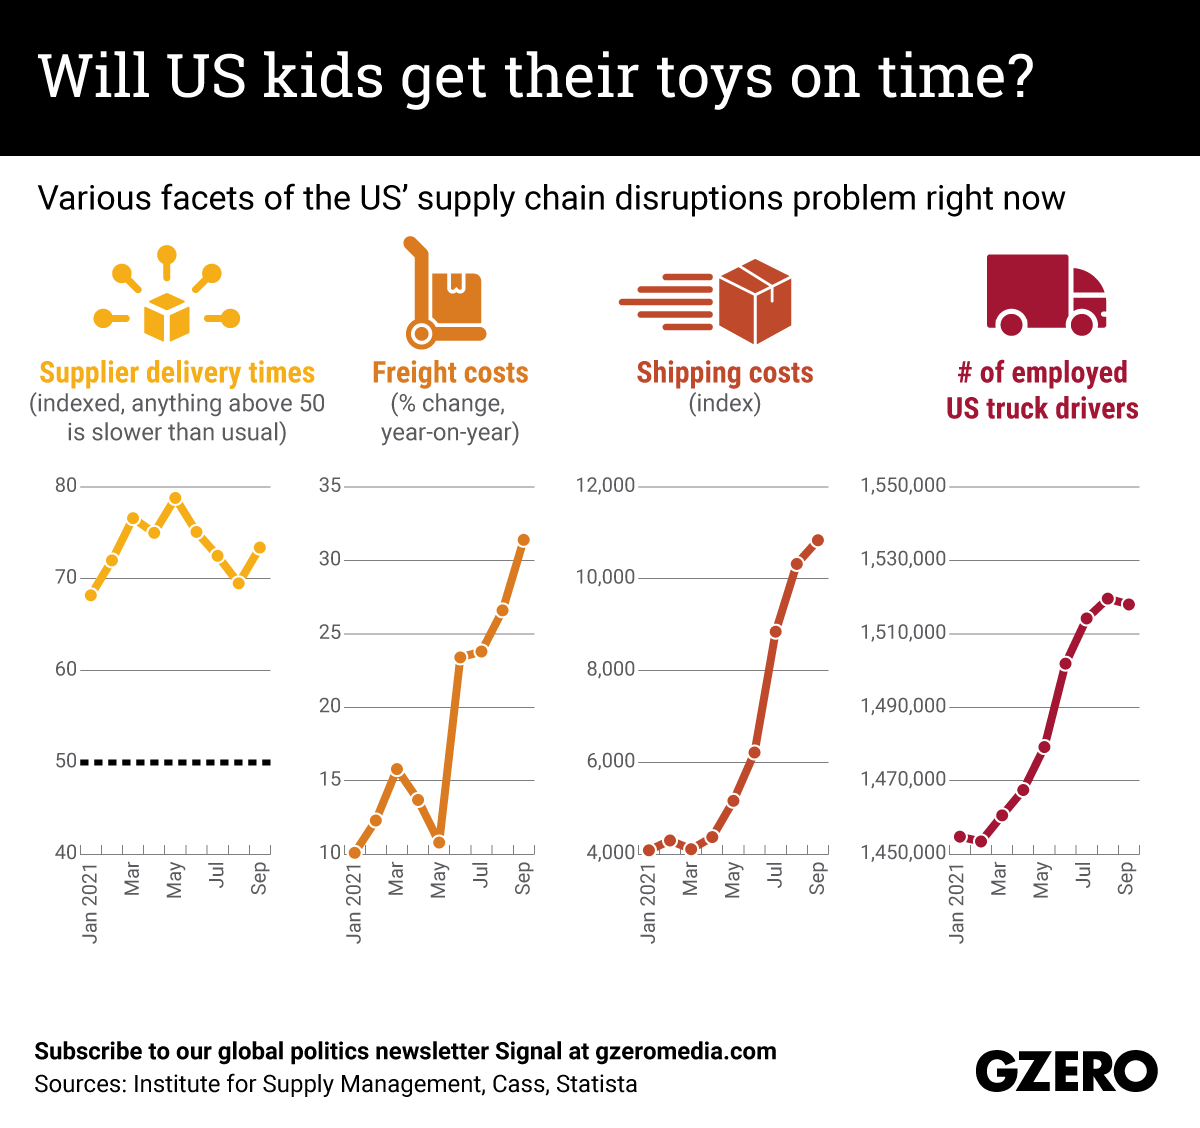 The Graphic Truth: Will US kids get their toys on time?